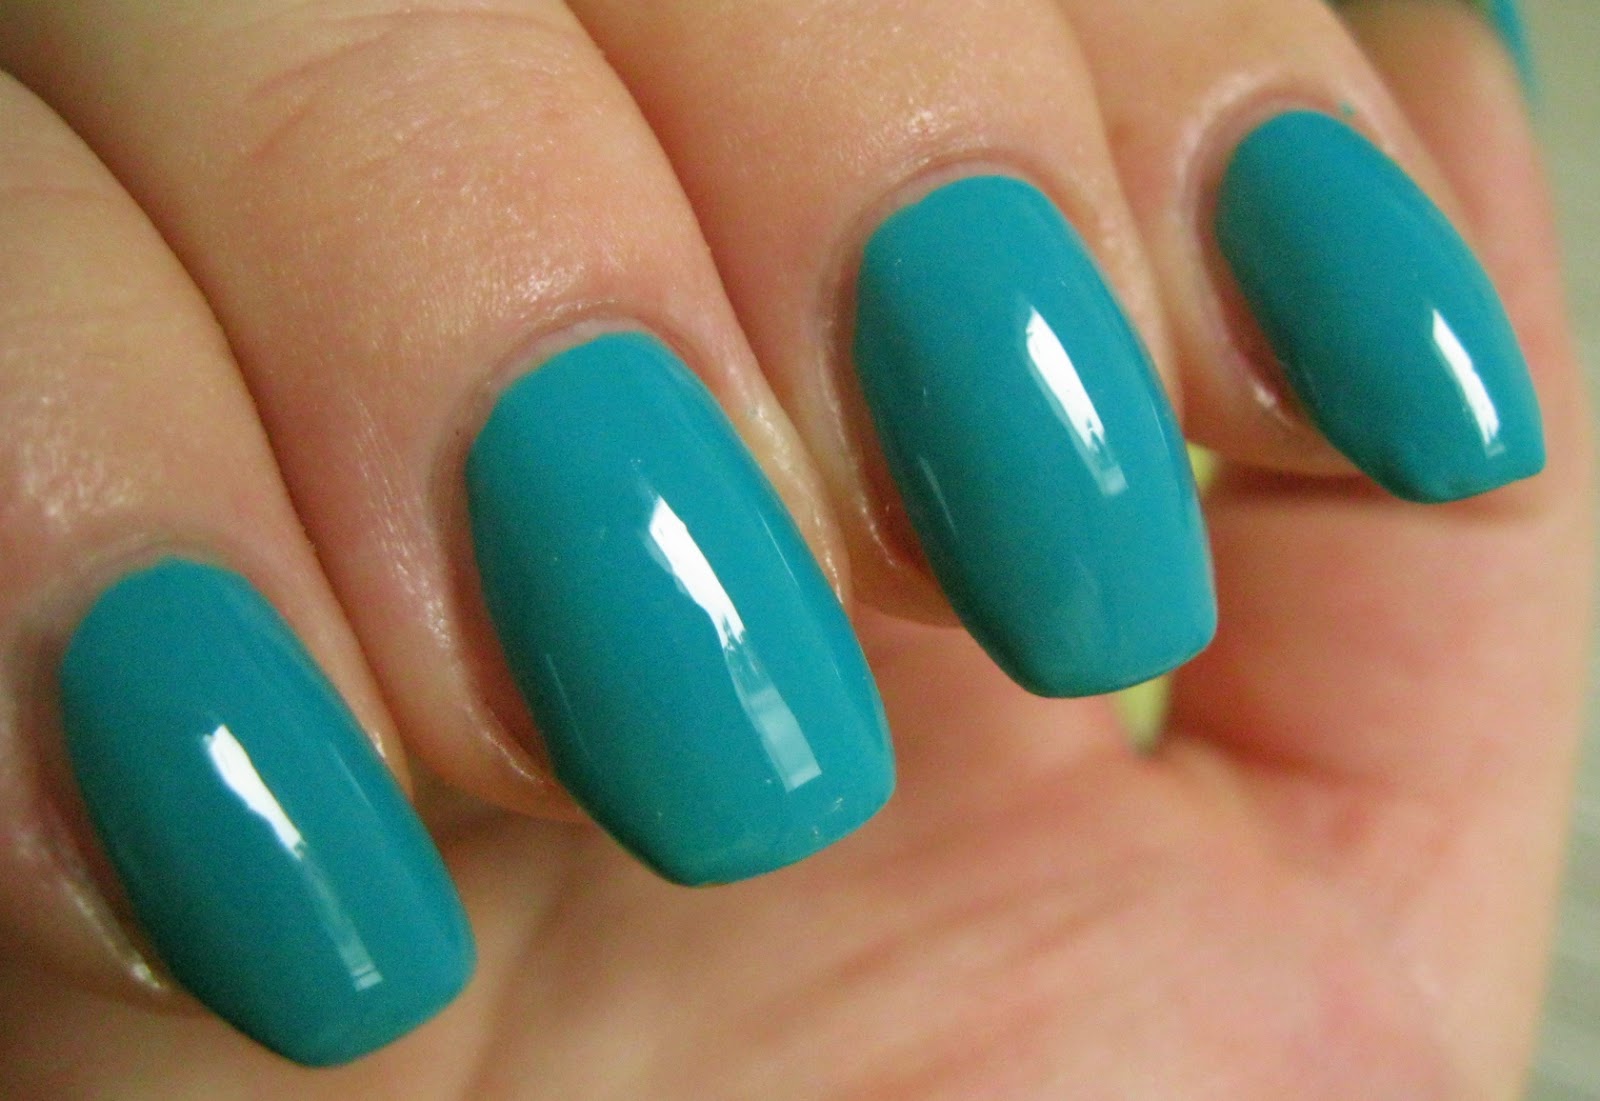 8. Butter London Nail Lacquer in "Slapper" - wide 3